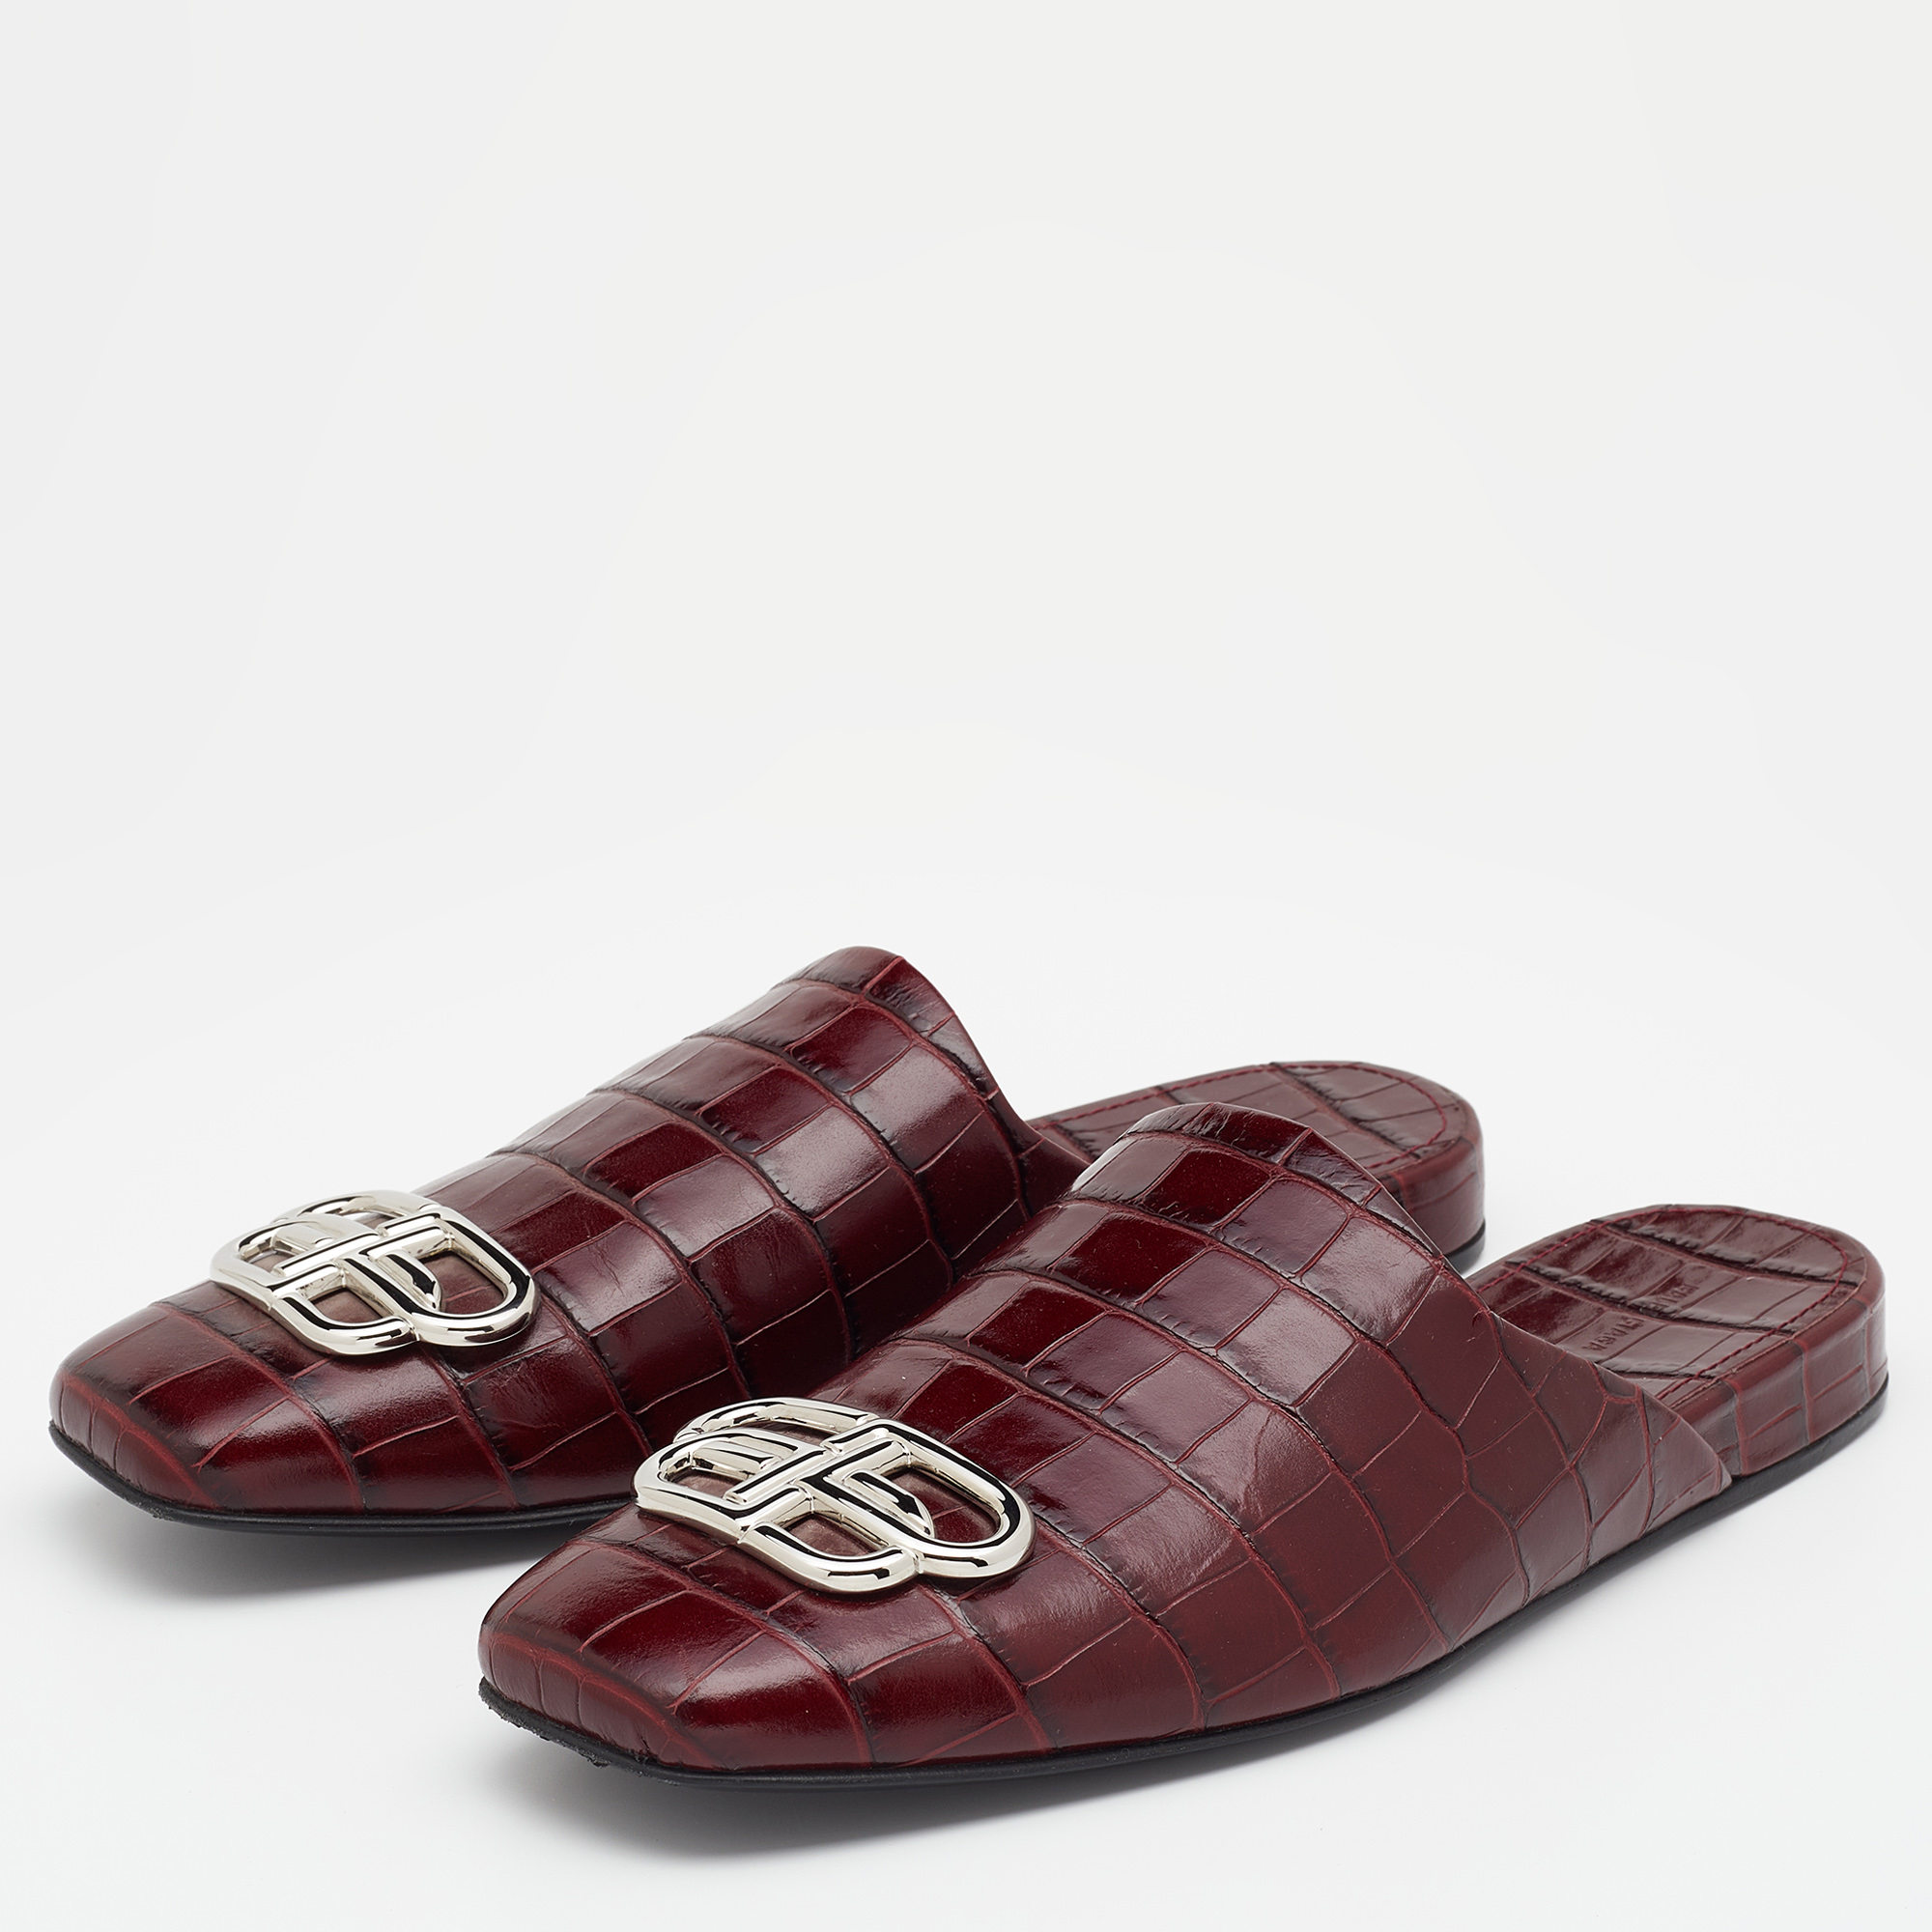 

Balenciaga Burgundy Croc Embossed Leather Cosy BB Mule Size